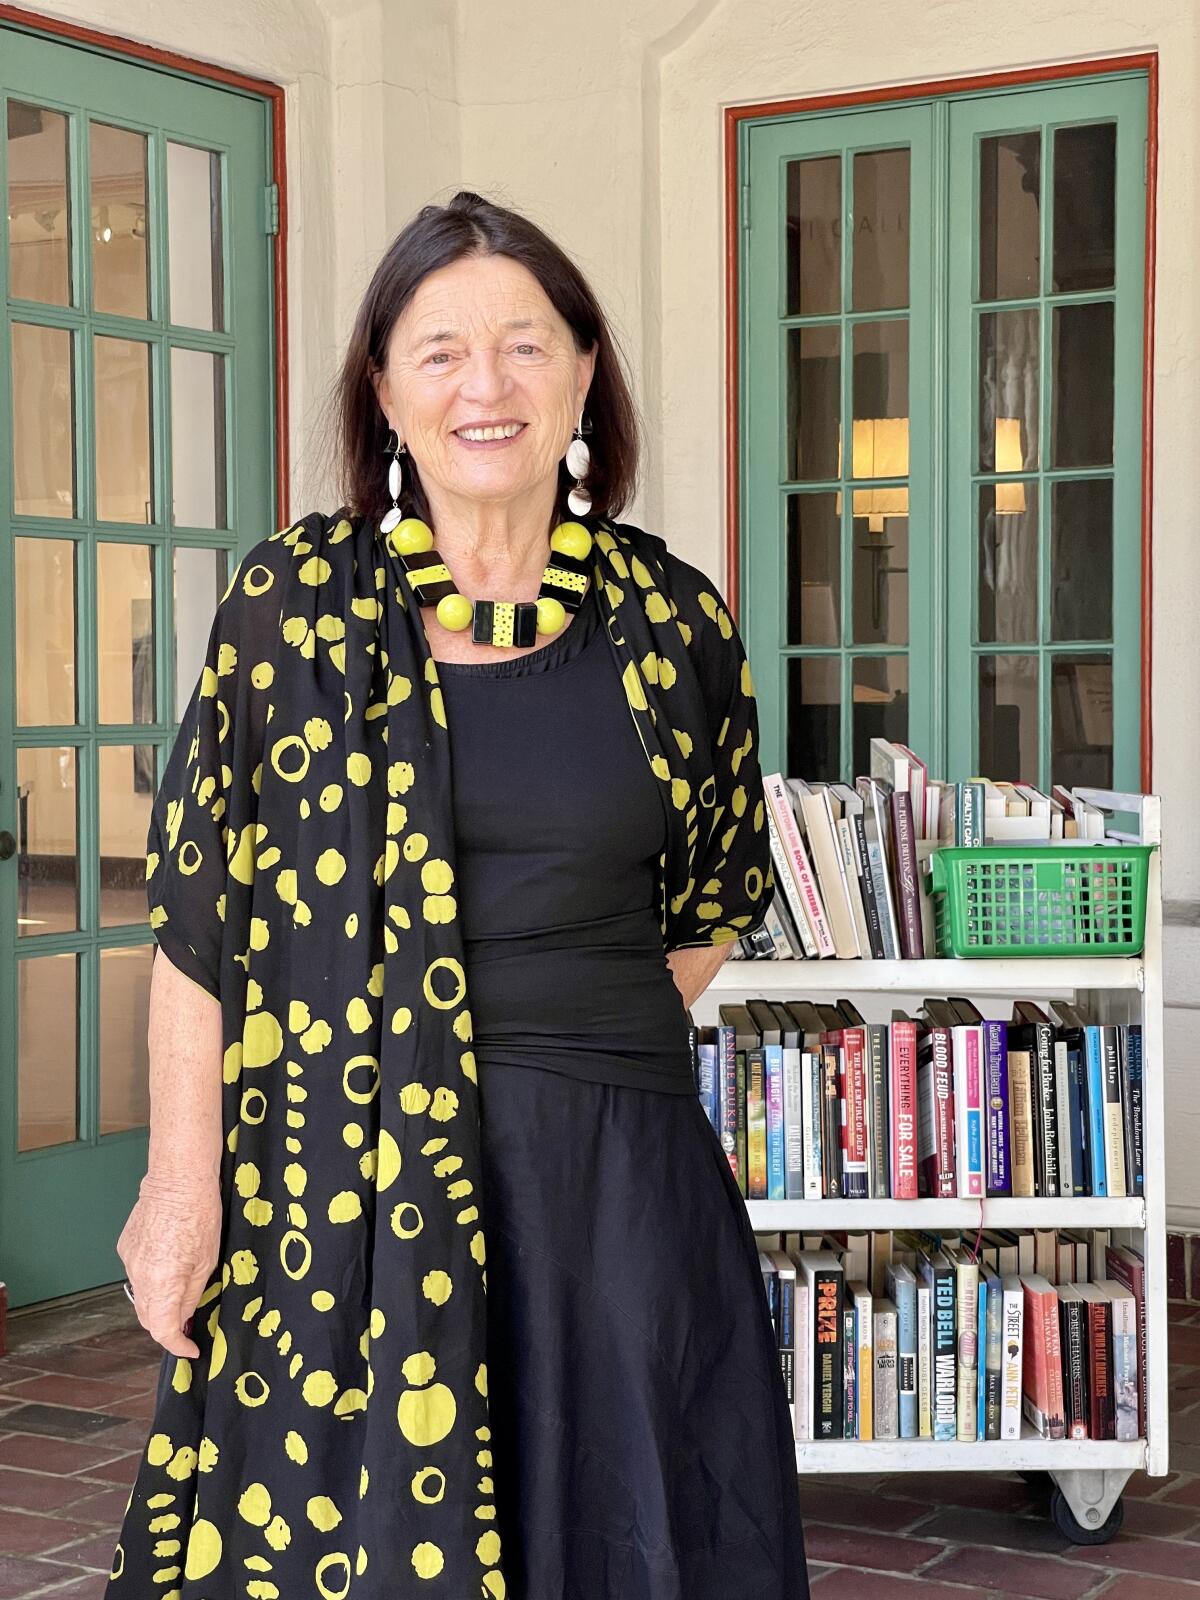 Erika Torri has led the Athenaeum Music & Arts Library in La Jolla for 32 years.